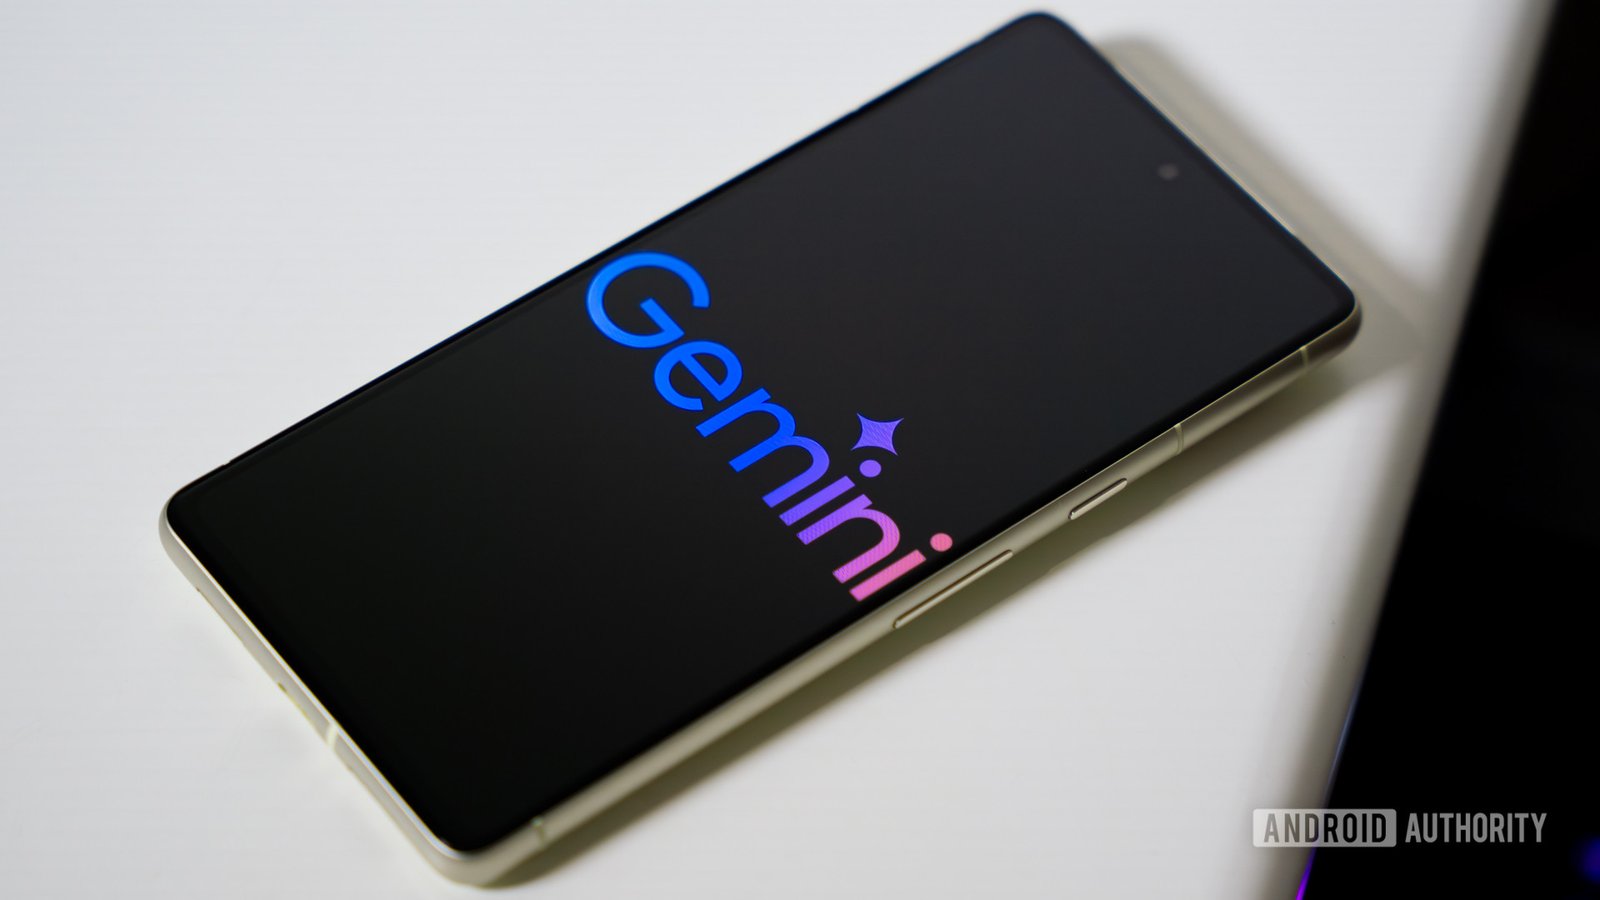 New Gemini ‘select text’ feature coming to Android